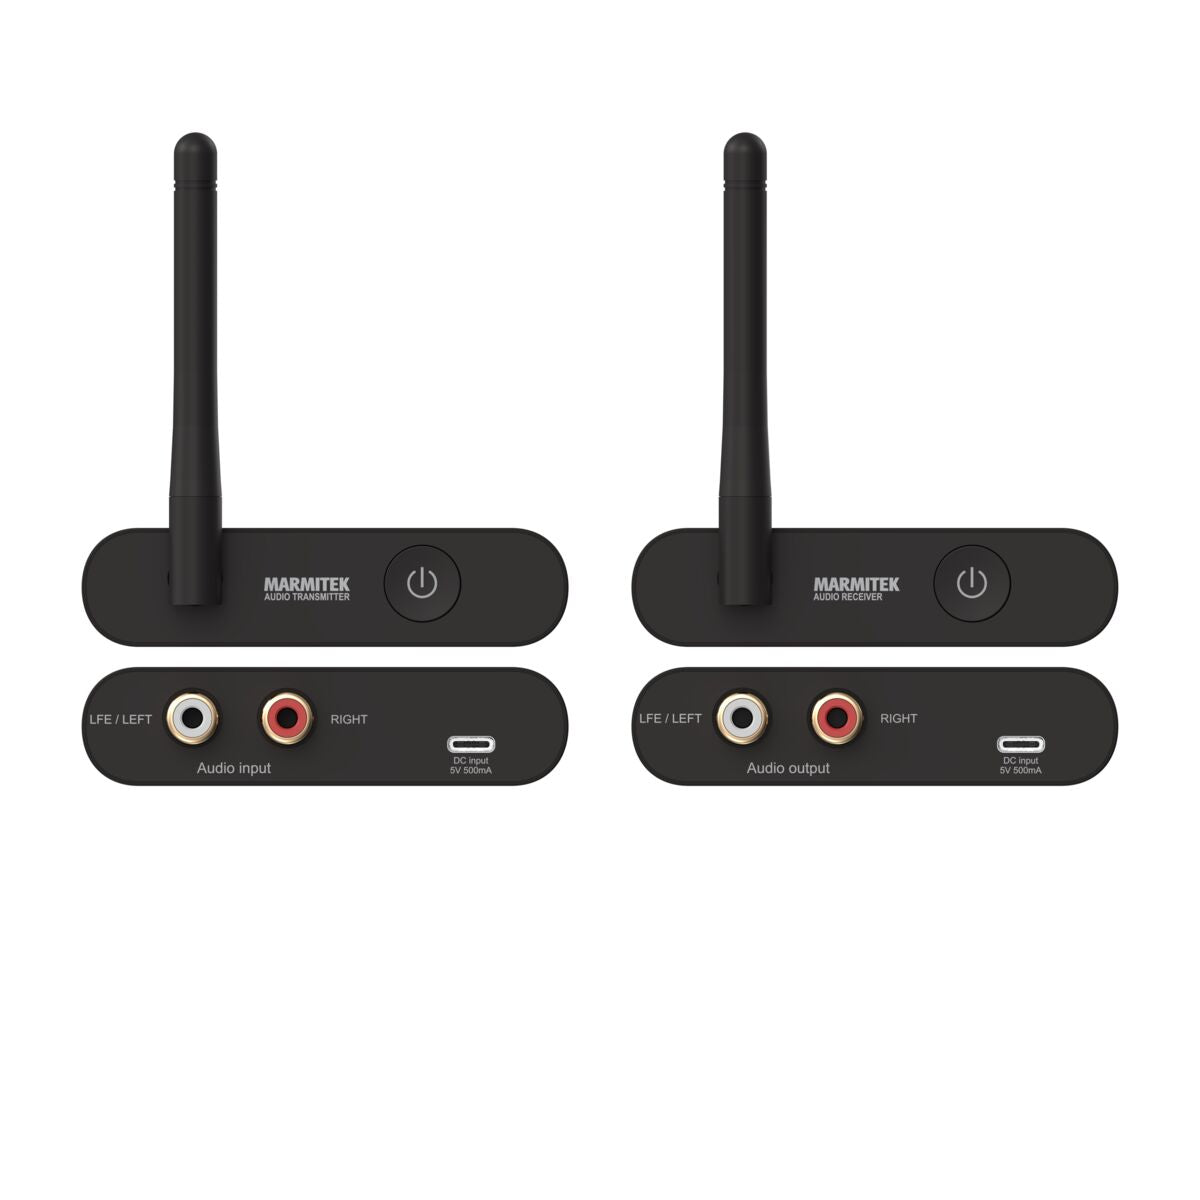 Subwoofer Anywhere 640 - Wireless Autio Transmitter and Receiver for Subwoofer - Front and Back View Image of Audio Transmitter and Audio Receiver | Marmitek